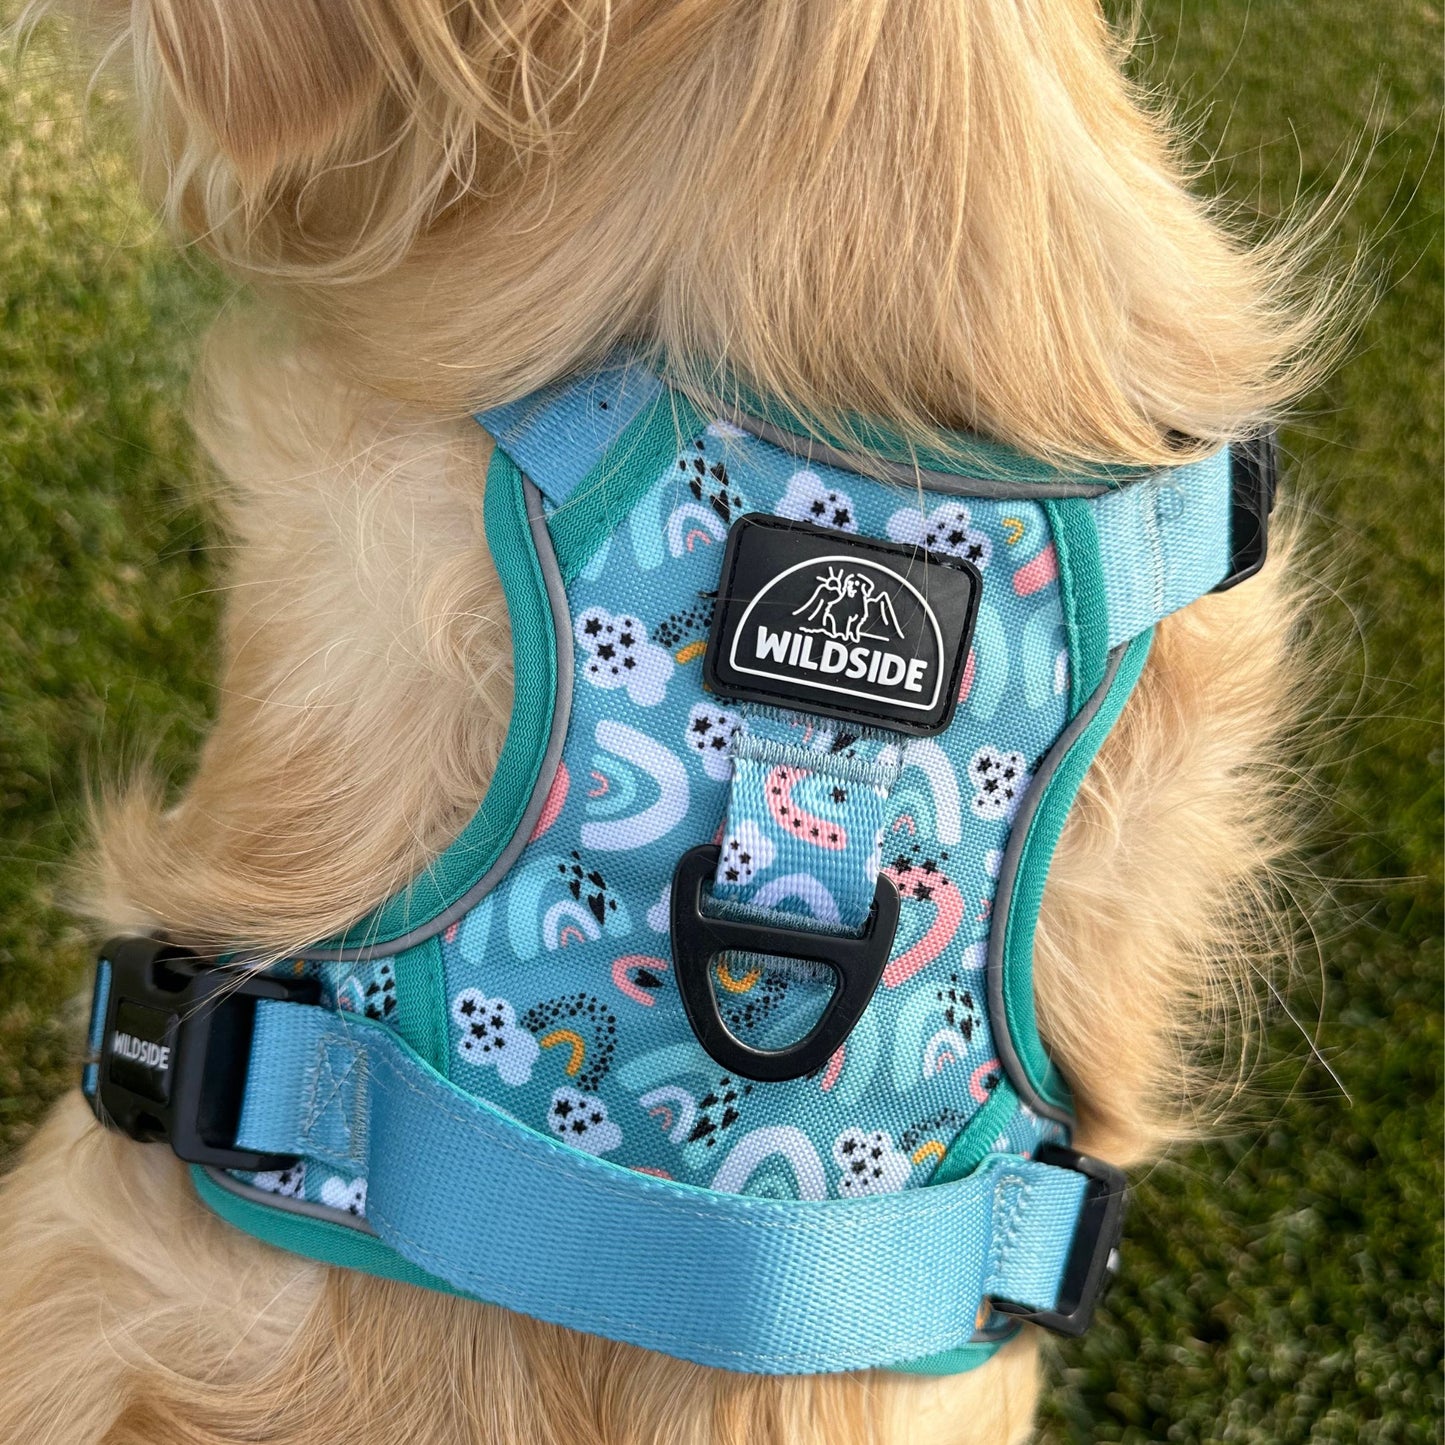 dog harness with handle , best dog harness for dogs, dog collars for big dogs that pull dog harness no escape dog harness small dog harness easy to put on best dog walking harness for large dogs dog harness escape proof dog harness green dog harness padding dog harness reviews dog harness front clip dog harness goldendoodle, front harness vs back harness